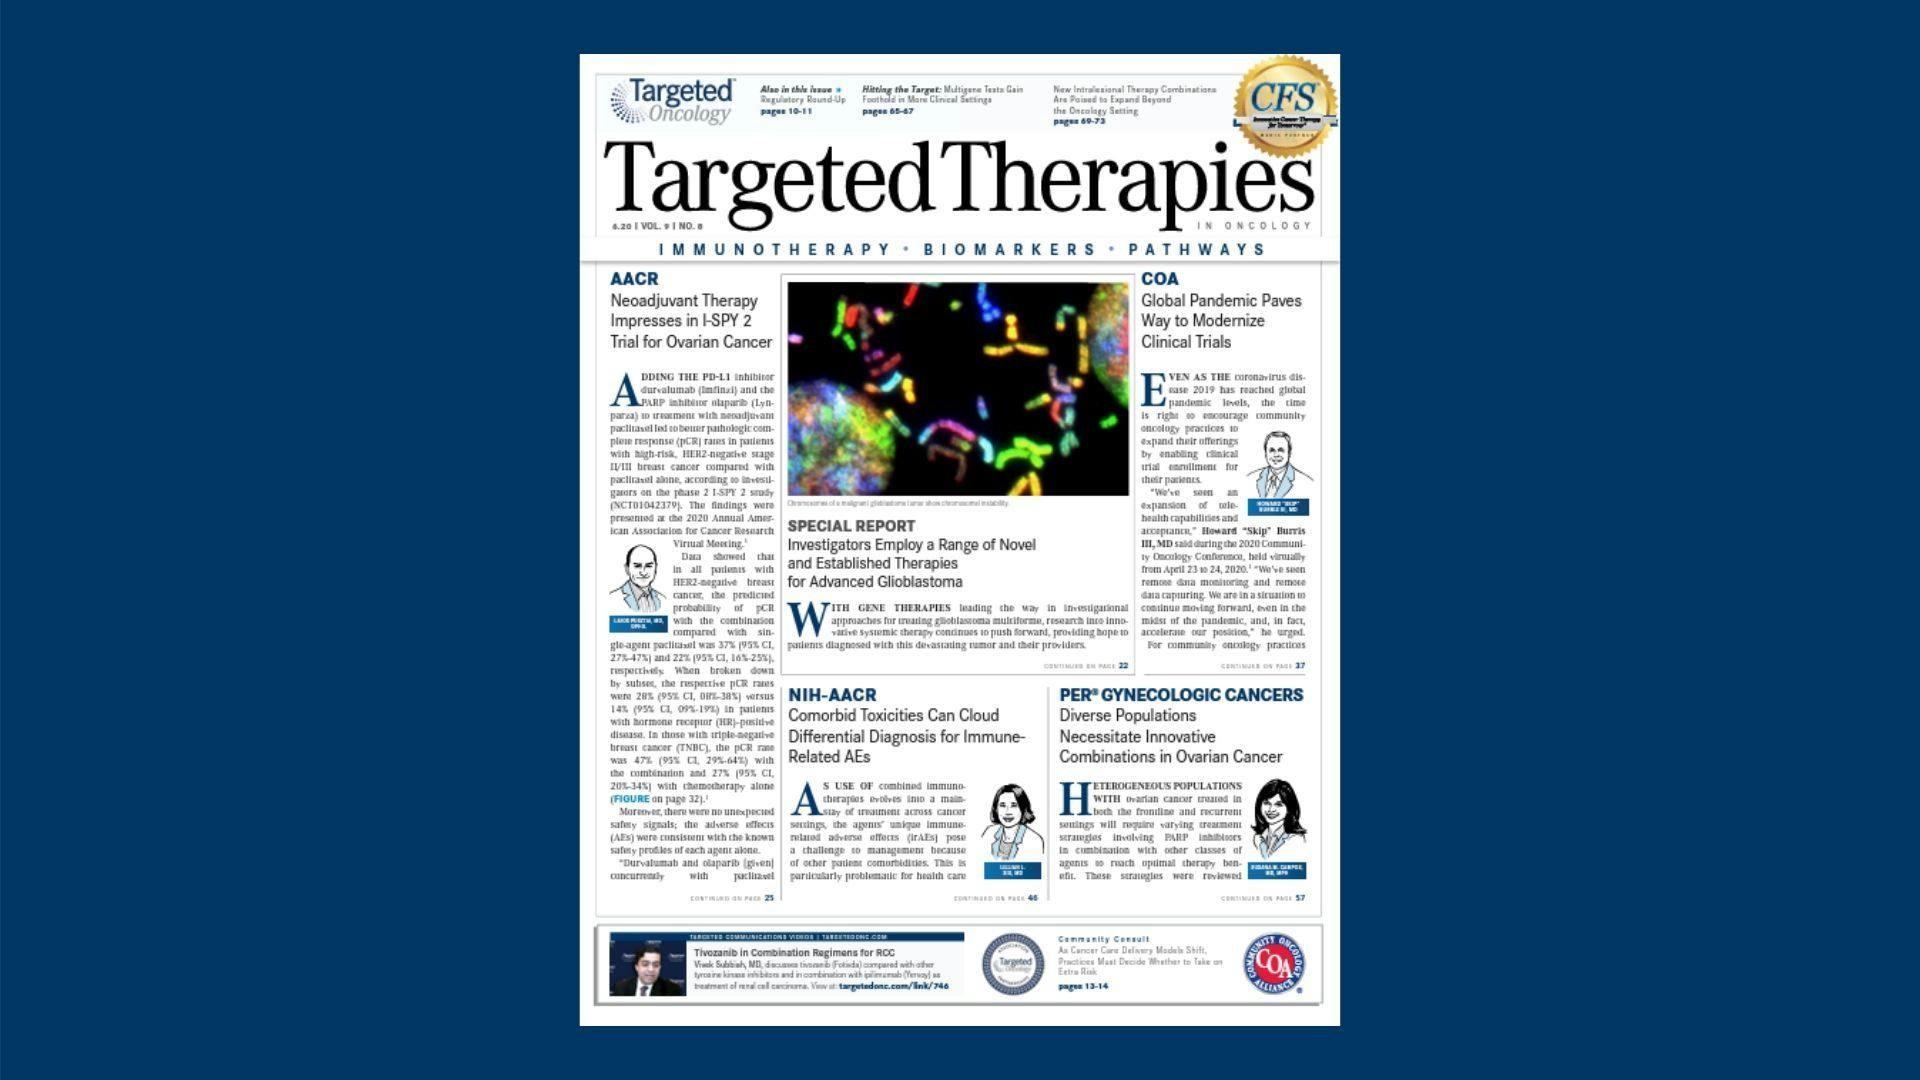 HITTING THE TARGET: Multigene Tests Gain Foothold in More Clinical Settings